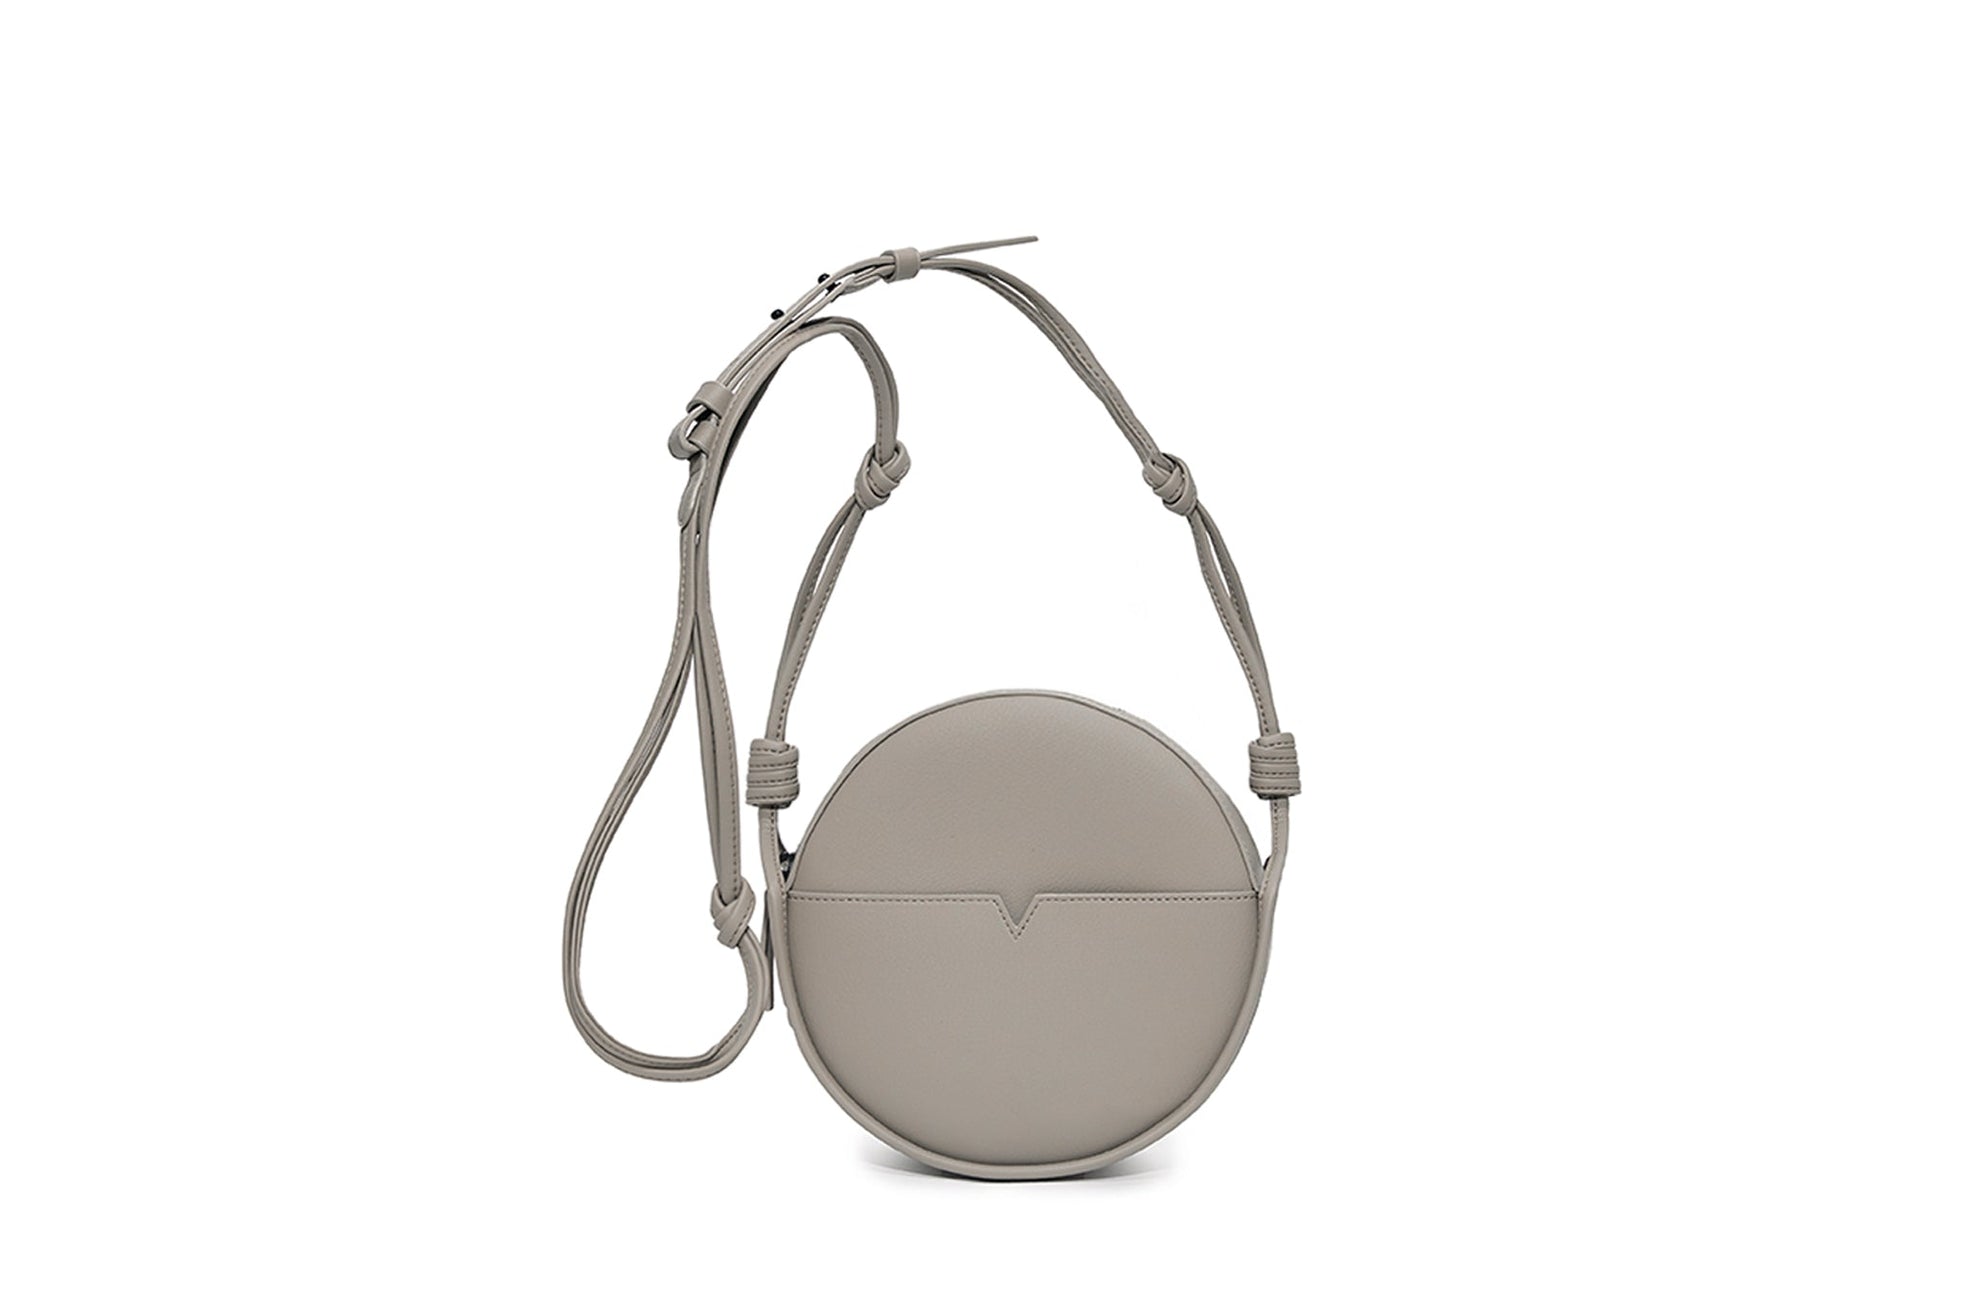 The Circle Crossbody - Sample Sale in Banbū in Stone image 1